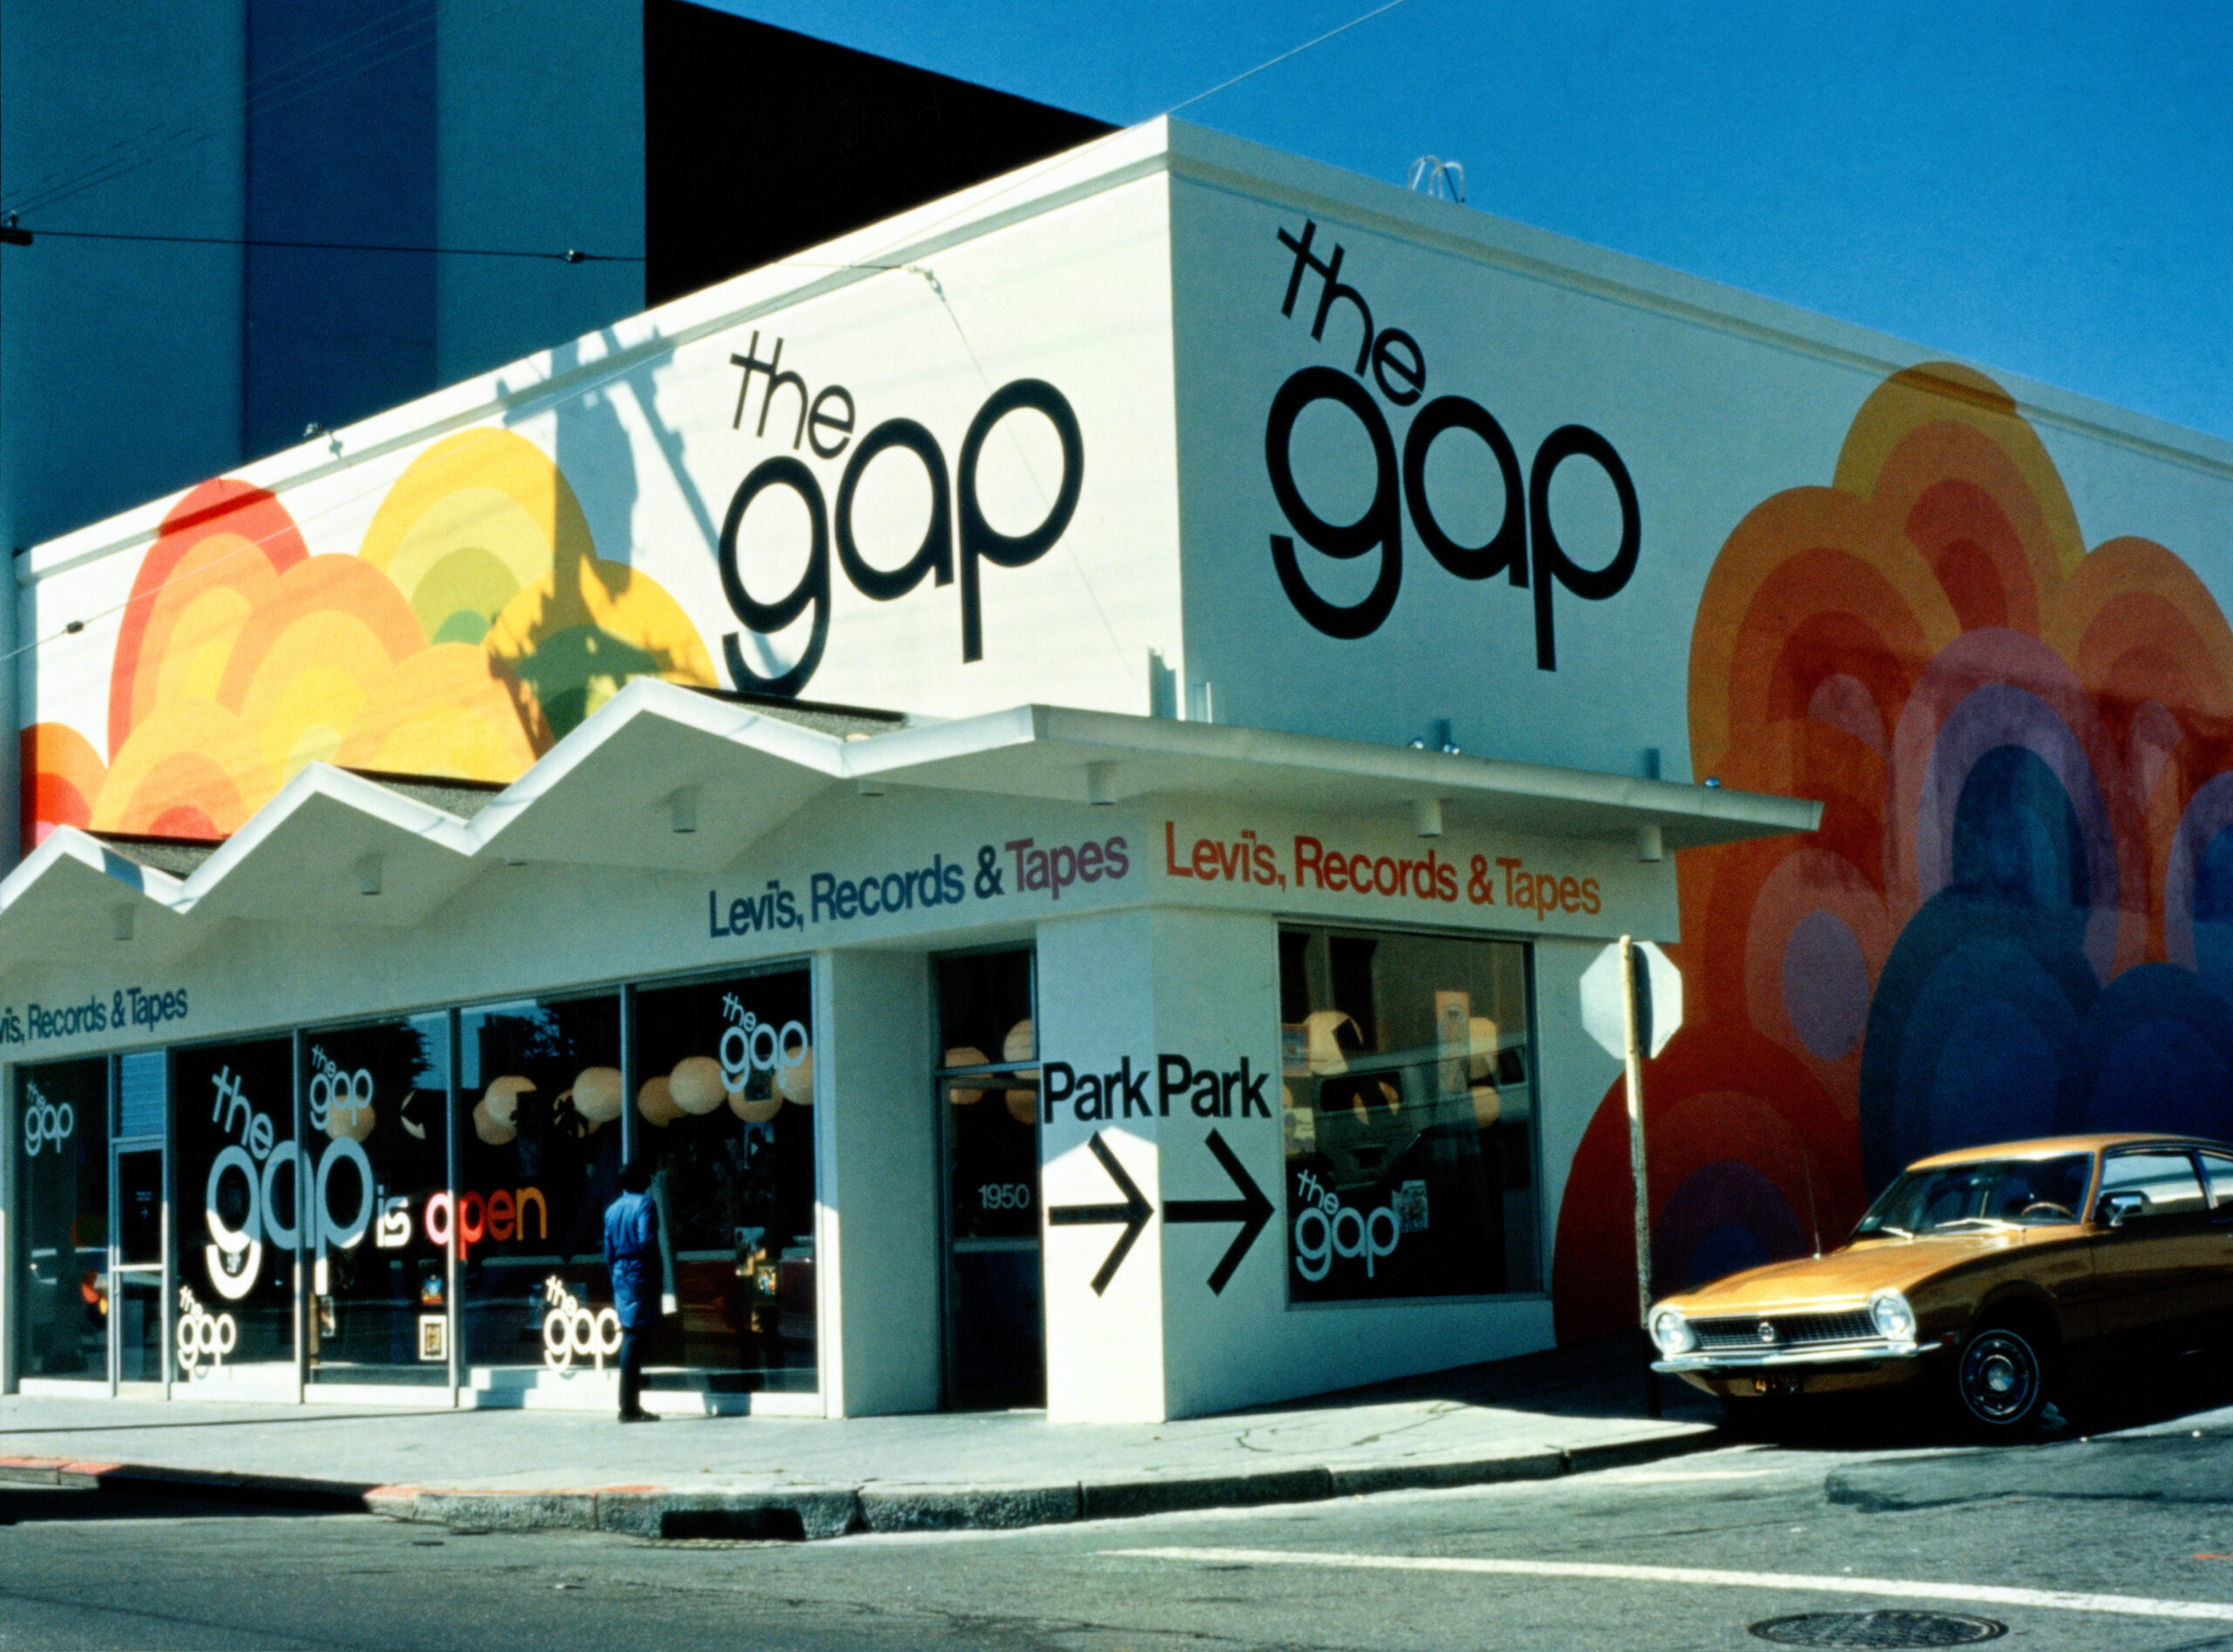 A vintage GAP store with colorful mural, parked retro car, and "Levis, Records & Tapes" signage.